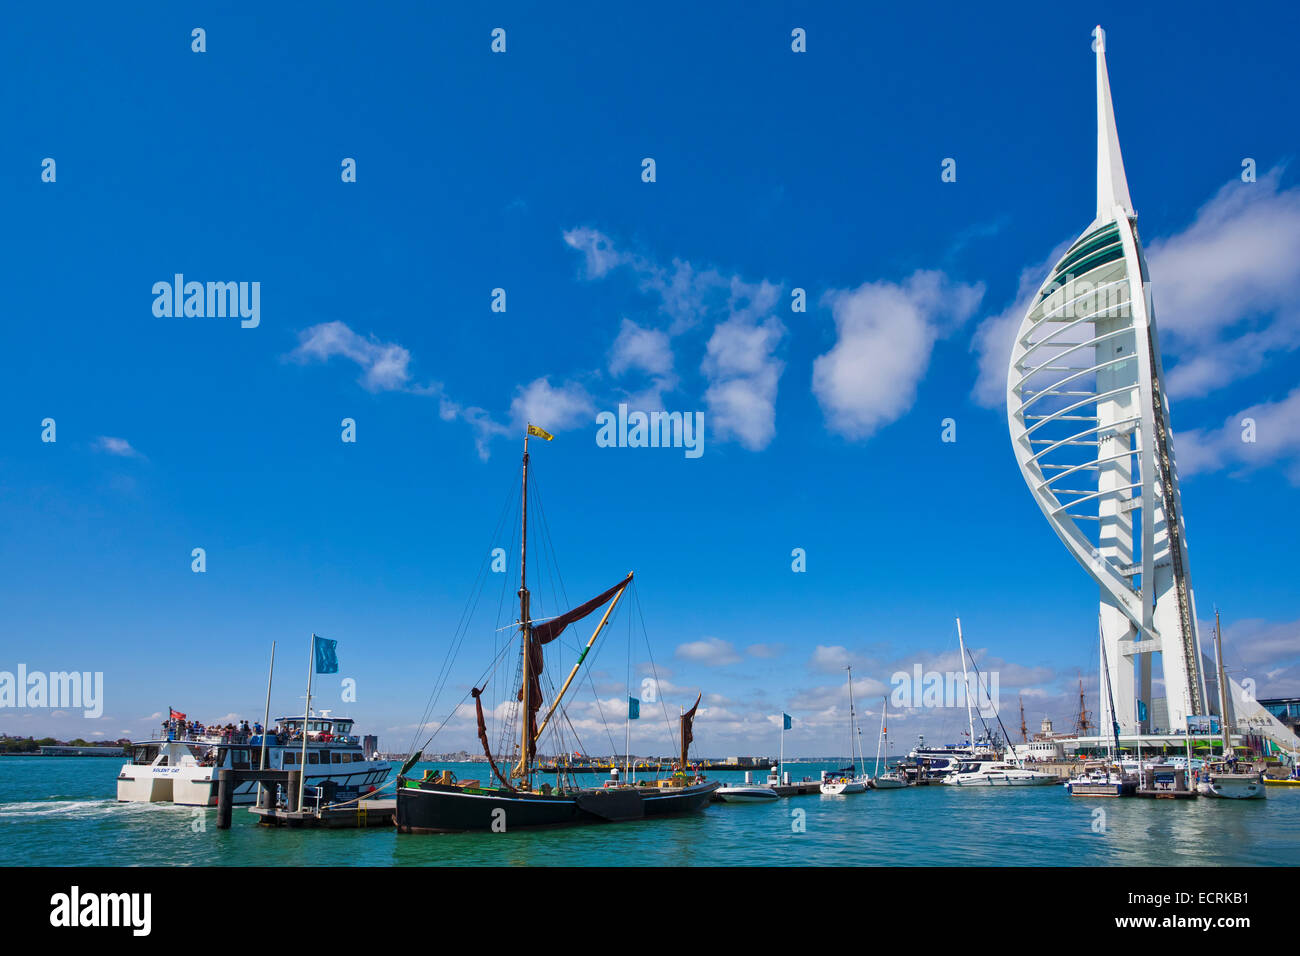 EXCURSION BOAT, SPINNAKER TOWER, GUNWHARF QUAYS, HARBOUR, PORTSMOUTH, HAMPSHIRE, ENGLAND, GREAT BRITAIN Stock Photo